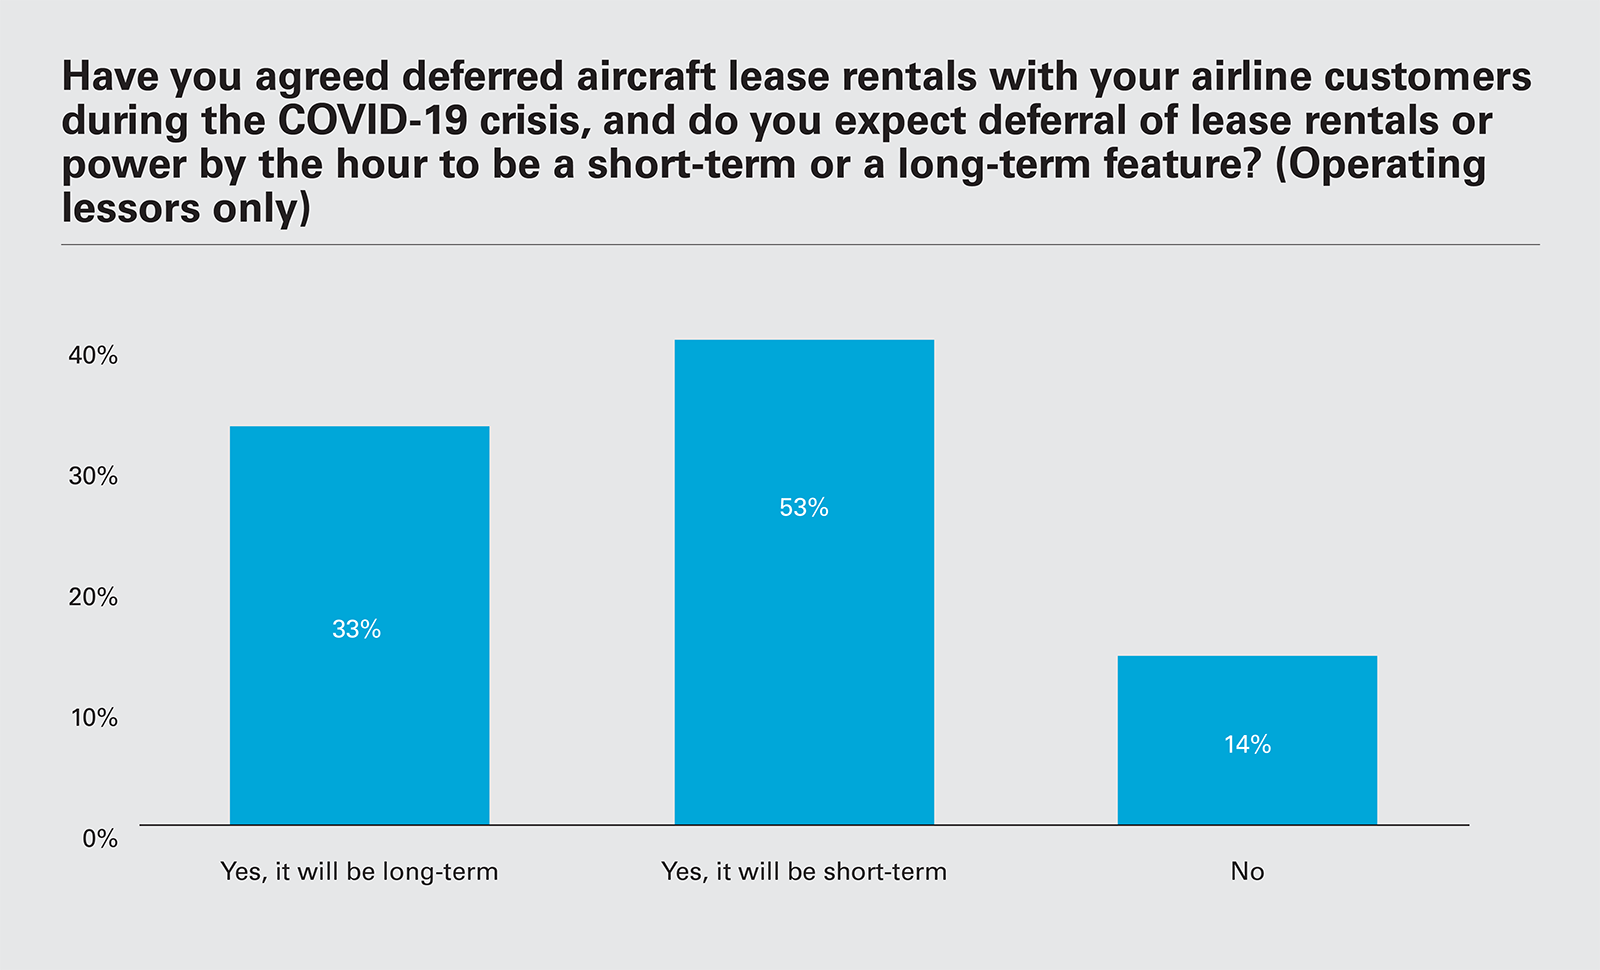 Have you agreed deferred aircraft lease rentals with your airline customers during the COVID-19 crisis, and do you expect deferral of lease rentals or power by the hour to be a short-term or a long-term feature? (Operating lessors only)